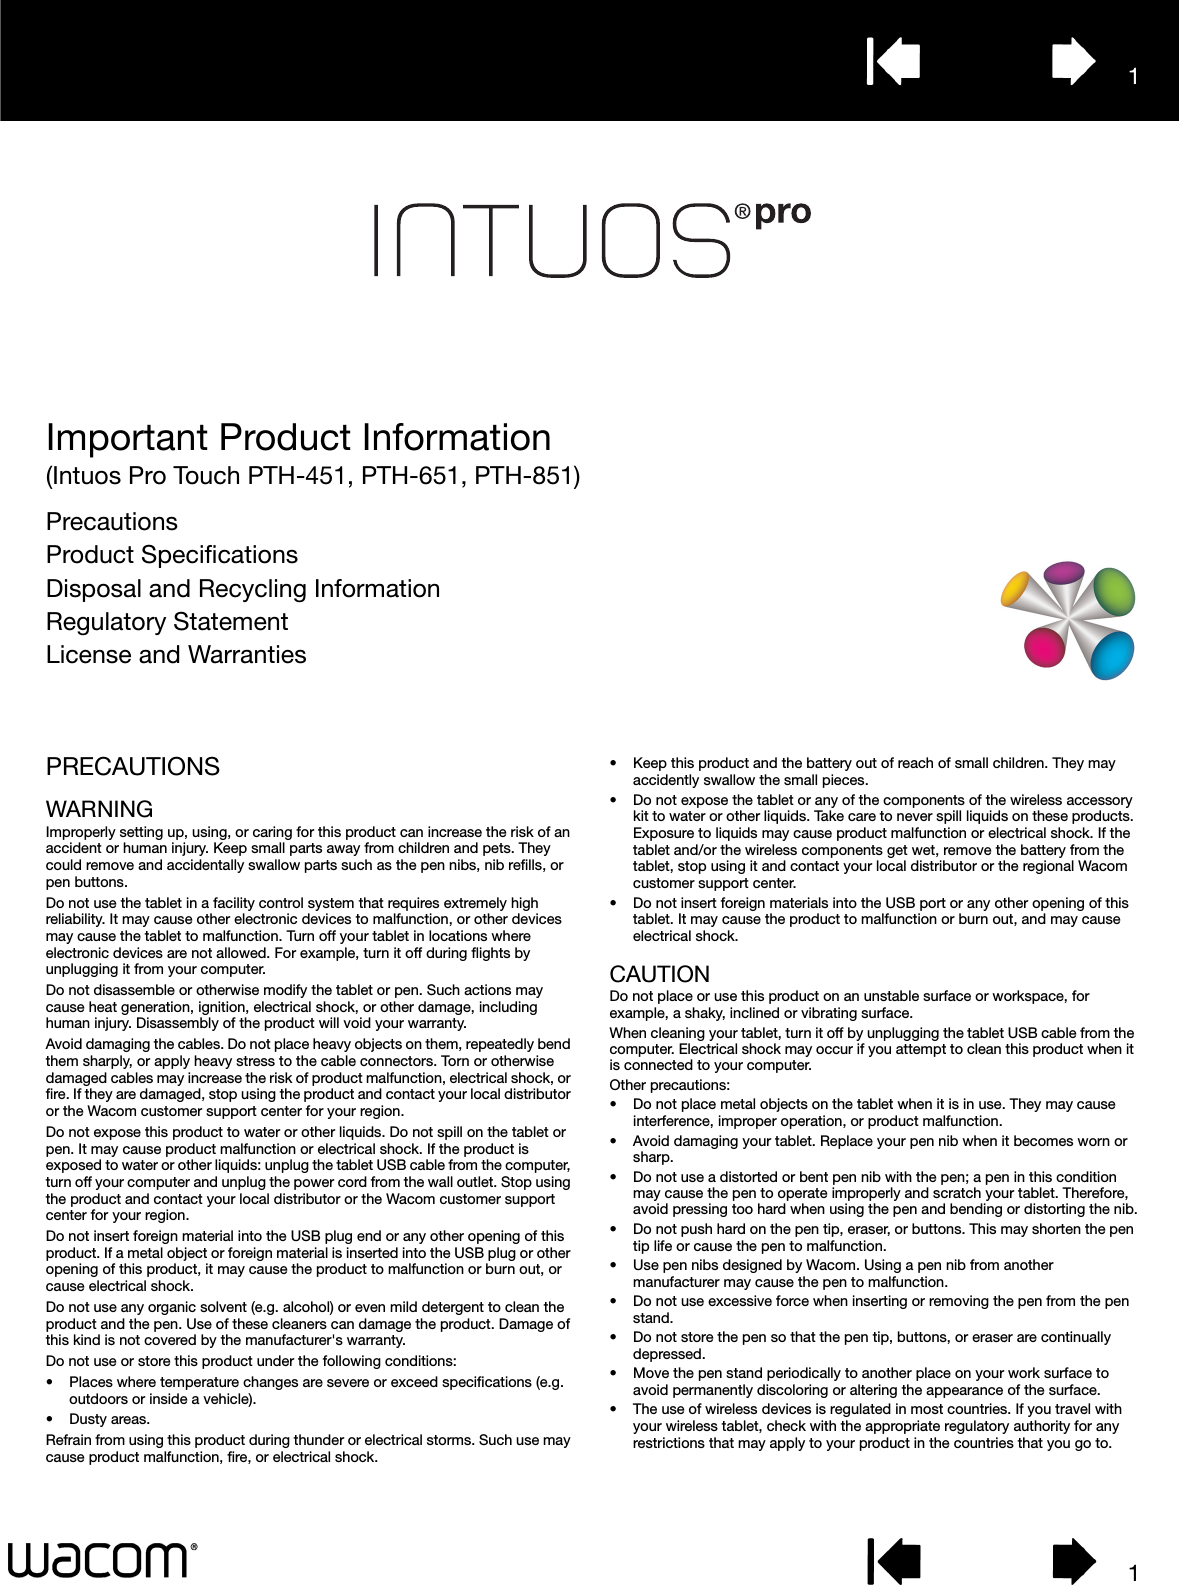 11Important Product Information(Intuos Pro Touch PTH-451, PTH-651, PTH-851)PrecautionsProduct SpecificationsDisposal and Recycling InformationRegulatory StatementLicense and WarrantiesPRECAUTIONSWARNINGImproperly setting up, using, or caring for this product can increase the risk of an accident or human injury. Keep small parts away from children and pets. They could remove and accidentally swallow parts such as the pen nibs, nib refills, or pen buttons. Do not use the tablet in a facility control system that requires extremely high reliability. It may cause other electronic devices to malfunction, or other devices may cause the tablet to malfunction. Turn off your tablet in locations where electronic devices are not allowed. For example, turn it off during flights by unplugging it from your computer.Do not disassemble or otherwise modify the tablet or pen. Such actions may cause heat generation, ignition, electrical shock, or other damage, including human injury. Disassembly of the product will void your warranty.Avoid damaging the cables. Do not place heavy objects on them, repeatedly bend them sharply, or apply heavy stress to the cable connectors. Torn or otherwise damaged cables may increase the risk of product malfunction, electrical shock, or fire. If they are damaged, stop using the product and contact your local distributor or the Wacom customer support center for your region.Do not expose this product to water or other liquids. Do not spill on the tablet or pen. It may cause product malfunction or electrical shock. If the product is exposed to water or other liquids: unplug the tablet USB cable from the computer, turn off your computer and unplug the power cord from the wall outlet. Stop using the product and contact your local distributor or the Wacom customer support center for your region. Do not insert foreign material into the USB plug end or any other opening of this product. If a metal object or foreign material is inserted into the USB plug or other opening of this product, it may cause the product to malfunction or burn out, or cause electrical shock.Do not use any organic solvent (e.g. alcohol) or even mild detergent to clean the product and the pen. Use of these cleaners can damage the product. Damage of this kind is not covered by the manufacturer&apos;s warranty.Do not use or store this product under the following conditions:• Places where temperature changes are severe or exceed specifications (e.g. outdoors or inside a vehicle).• Dusty areas.Refrain from using this product during thunder or electrical storms. Such use may cause product malfunction, fire, or electrical shock.• Keep this product and the battery out of reach of small children. They may accidently swallow the small pieces.• Do not expose the tablet or any of the components of the wireless accessory kit to water or other liquids. Take care to never spill liquids on these products. Exposure to liquids may cause product malfunction or electrical shock. If the tablet and/or the wireless components get wet, remove the battery from the tablet, stop using it and contact your local distributor or the regional Wacom customer support center.• Do not insert foreign materials into the USB port or any other opening of this tablet. It may cause the product to malfunction or burn out, and may cause electrical shock.CAUTIONDo not place or use this product on an unstable surface or workspace, for example, a shaky, inclined or vibrating surface.When cleaning your tablet, turn it off by unplugging the tablet USB cable from the computer. Electrical shock may occur if you attempt to clean this product when it is connected to your computer.Other precautions:• Do not place metal objects on the tablet when it is in use. They may cause interference, improper operation, or product malfunction.• Avoid damaging your tablet. Replace your pen nib when it becomes worn or sharp.• Do not use a distorted or bent pen nib with the pen; a pen in this condition may cause the pen to operate improperly and scratch your tablet. Therefore, avoid pressing too hard when using the pen and bending or distorting the nib.• Do not push hard on the pen tip, eraser, or buttons. This may shorten the pen tip life or cause the pen to malfunction.• Use pen nibs designed by Wacom. Using a pen nib from another manufacturer may cause the pen to malfunction.• Do not use excessive force when inserting or removing the pen from the pen stand.• Do not store the pen so that the pen tip, buttons, or eraser are continually depressed.• Move the pen stand periodically to another place on your work surface to avoid permanently discoloring or altering the appearance of the surface.• The use of wireless devices is regulated in most countries. If you travel with your wireless tablet, check with the appropriate regulatory authority for any restrictions that may apply to your product in the countries that you go to.